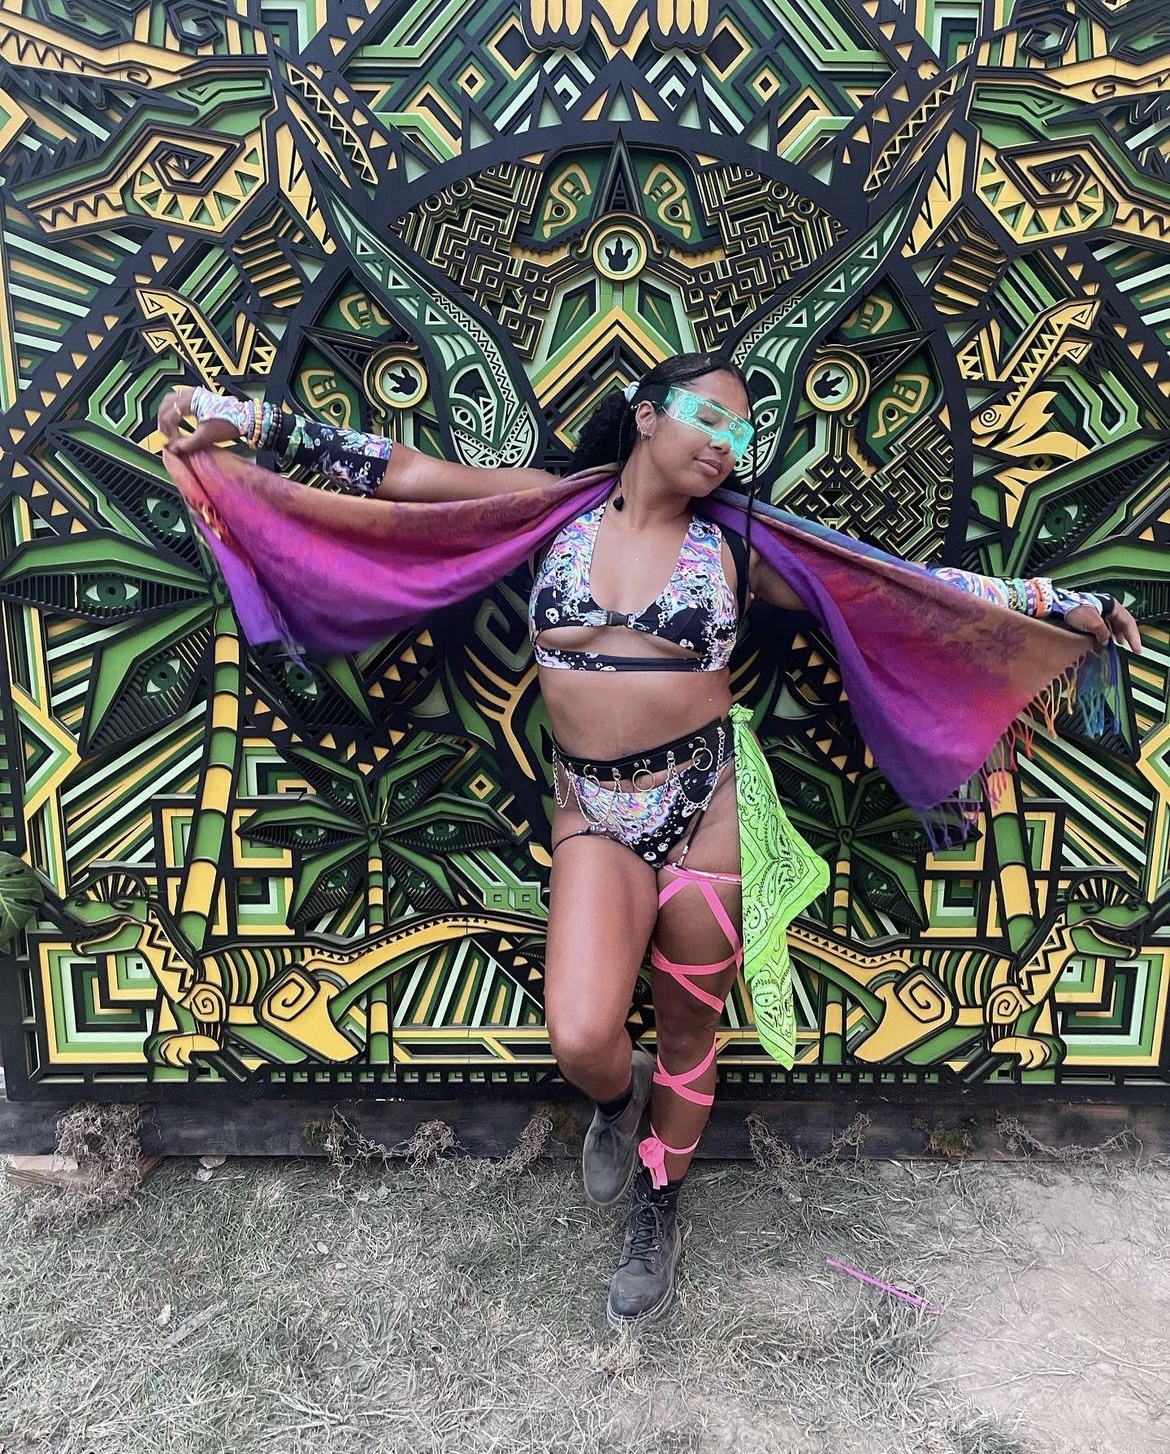 Woman wearing psychedelic two piece outfit with dangling chains and pink leg wrap holding a pashmina and wearing green glasses in front of green and yellow psychedelic art wall